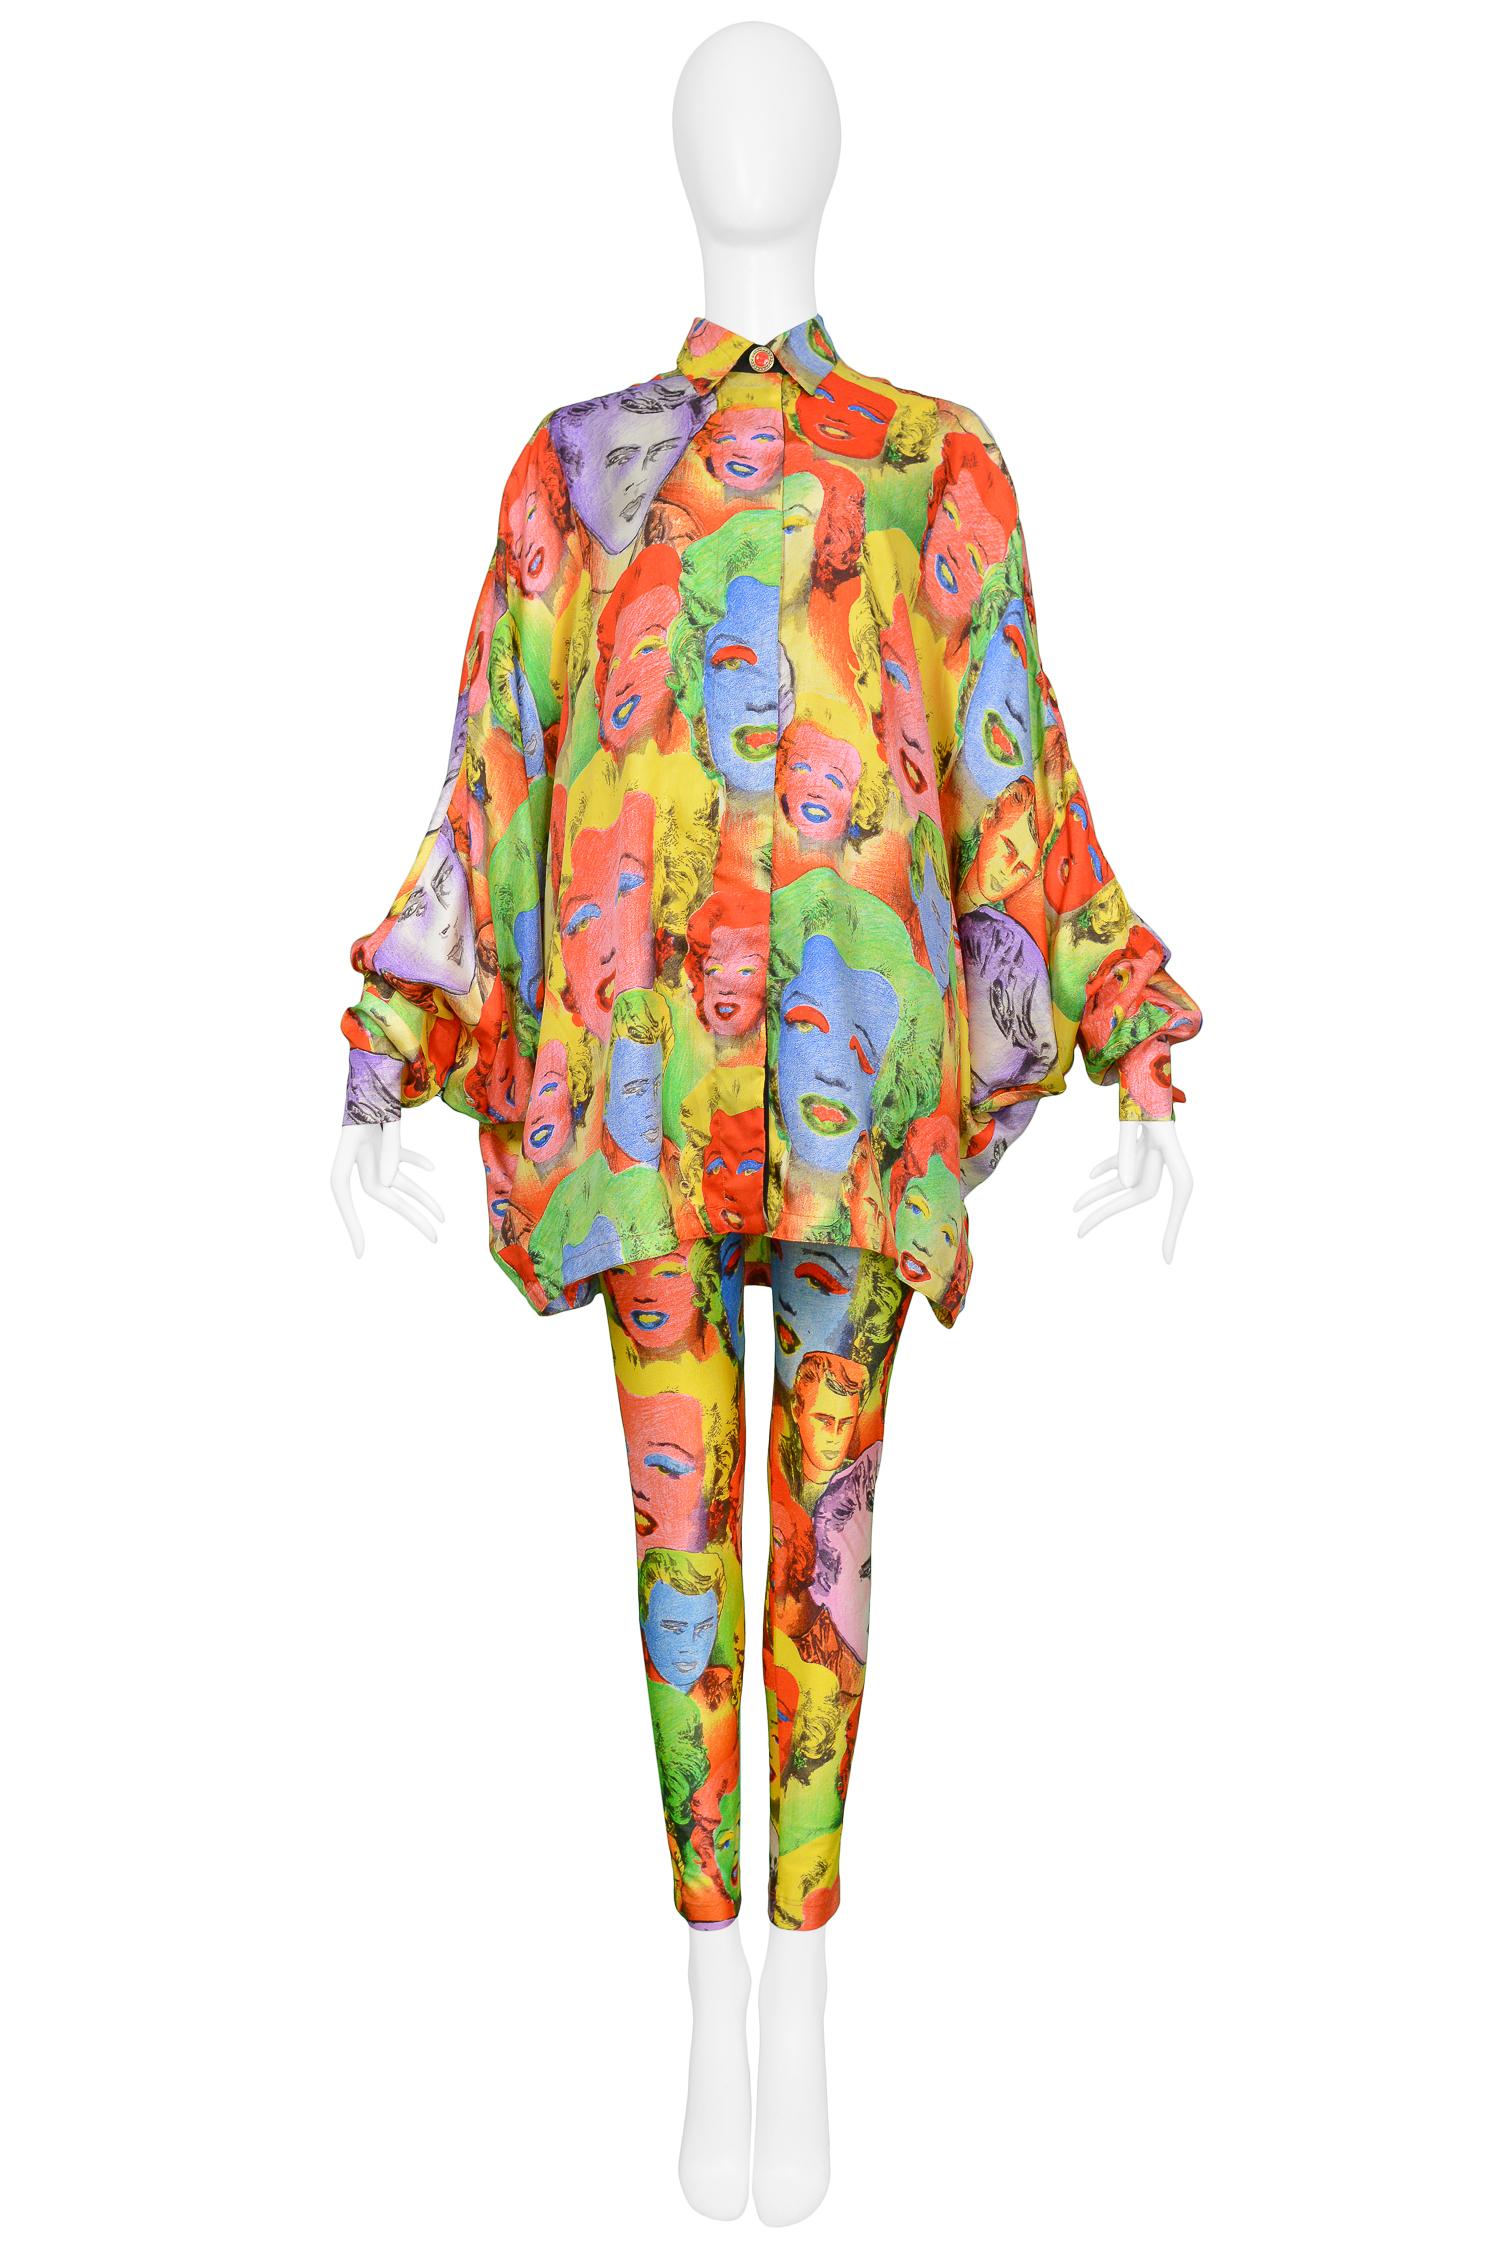 Vintage Gianni Versace iconic pop art James Dean & Marilyn Monroe printed silk oversized button-front shirt and legging ensemble. Featured on Cindy Crawford for Harper’s Bazaar, March 1991.

Excellent Condition.

Size: TOP: 42, LEGGINGS: 44